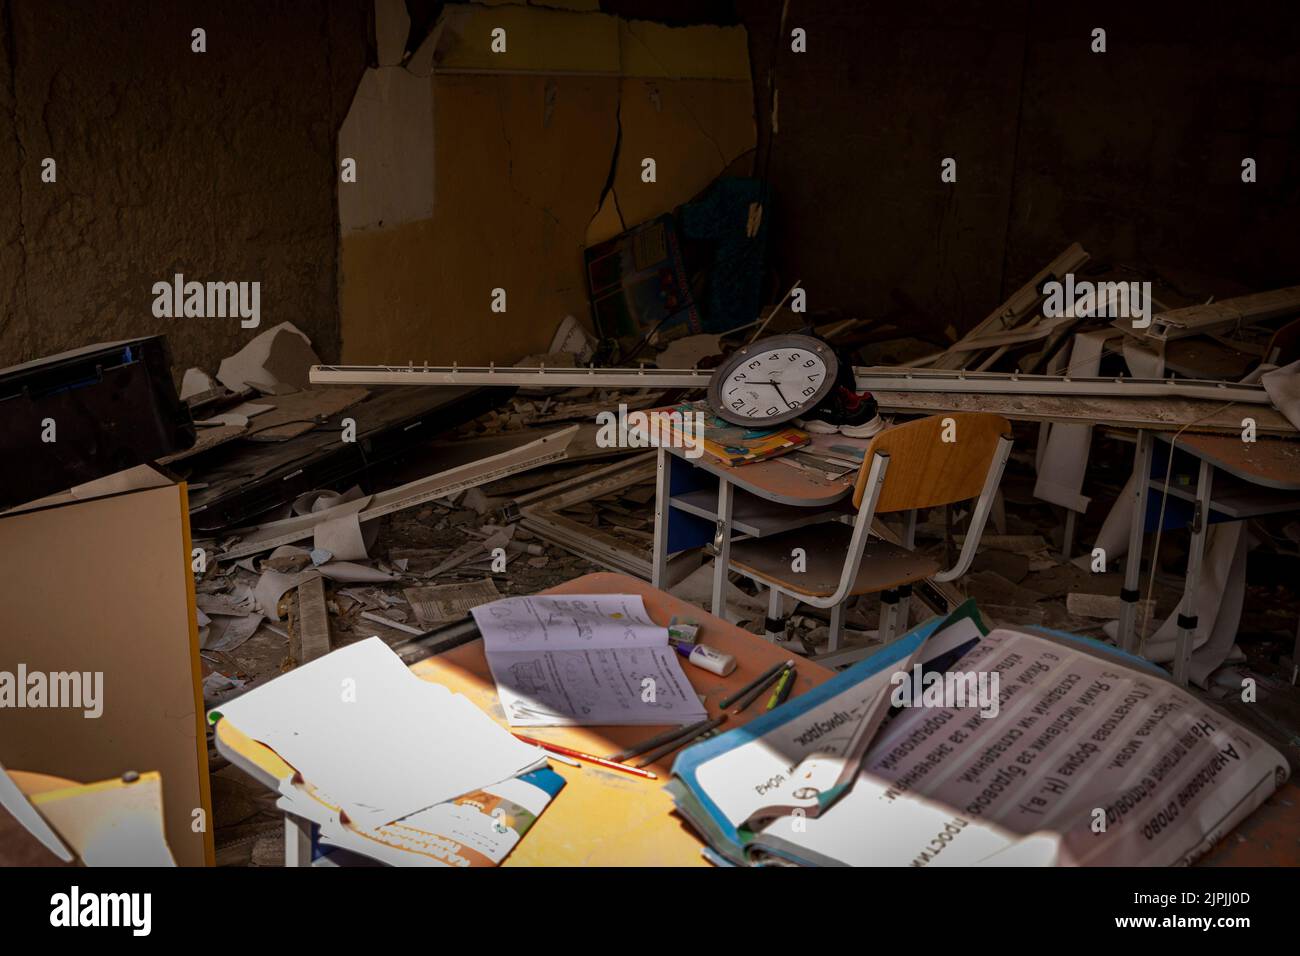 August 18, 2022, Mykolayivs'ka Oblast'', Ukraine: An interior view of a destroyed classroom at a school that was struck by a Russian airstrike in Mykolaiv Oblast. As Ukrainian officials have claimed partiality to recover their territory and launching a counter-offensive in the south axis of the country including Mykolaiv Oblast, the area has been under heavy fighting, and villages surrounding Mykolaiv city have been under heavy shelling from Russian forces. (Credit Image: © Alex Chan Tsz Yuk/SOPA Images via ZUMA Press Wire) Stock Photo